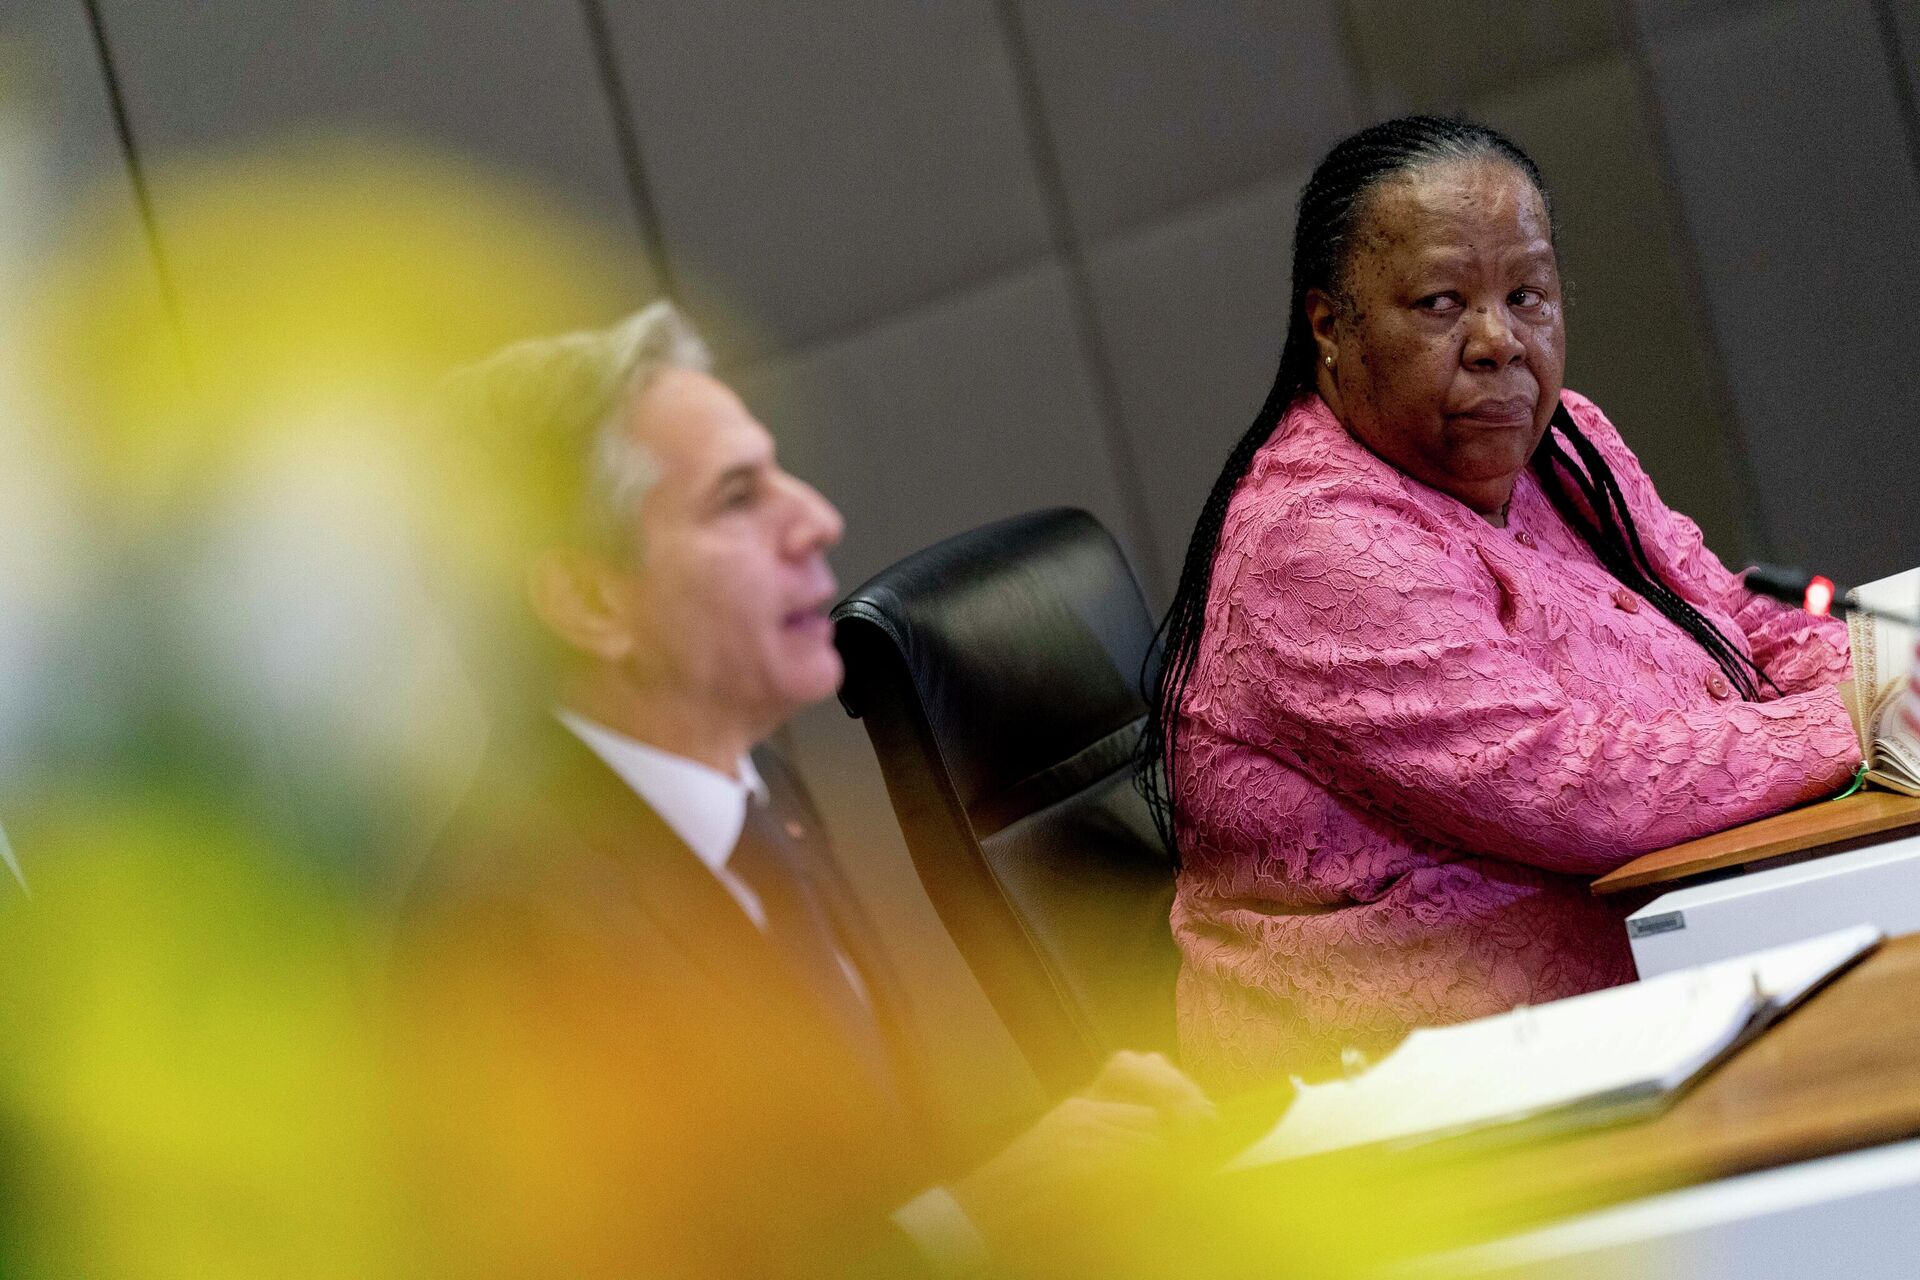 Secretary of State Antony Blinken, accompanied by South Africa's Foreign Minister Naledi Pandor, speaks during a news conference after meeting together at the South African Department of International Relations and Cooperation in Pretoria, South Africa, Monday, Aug. 8, 2022. Blinken is on a ten day trip to Cambodia, Philippines, South Africa, Congo, and Rwanda. - Sputnik International, 1920, 18.10.2022